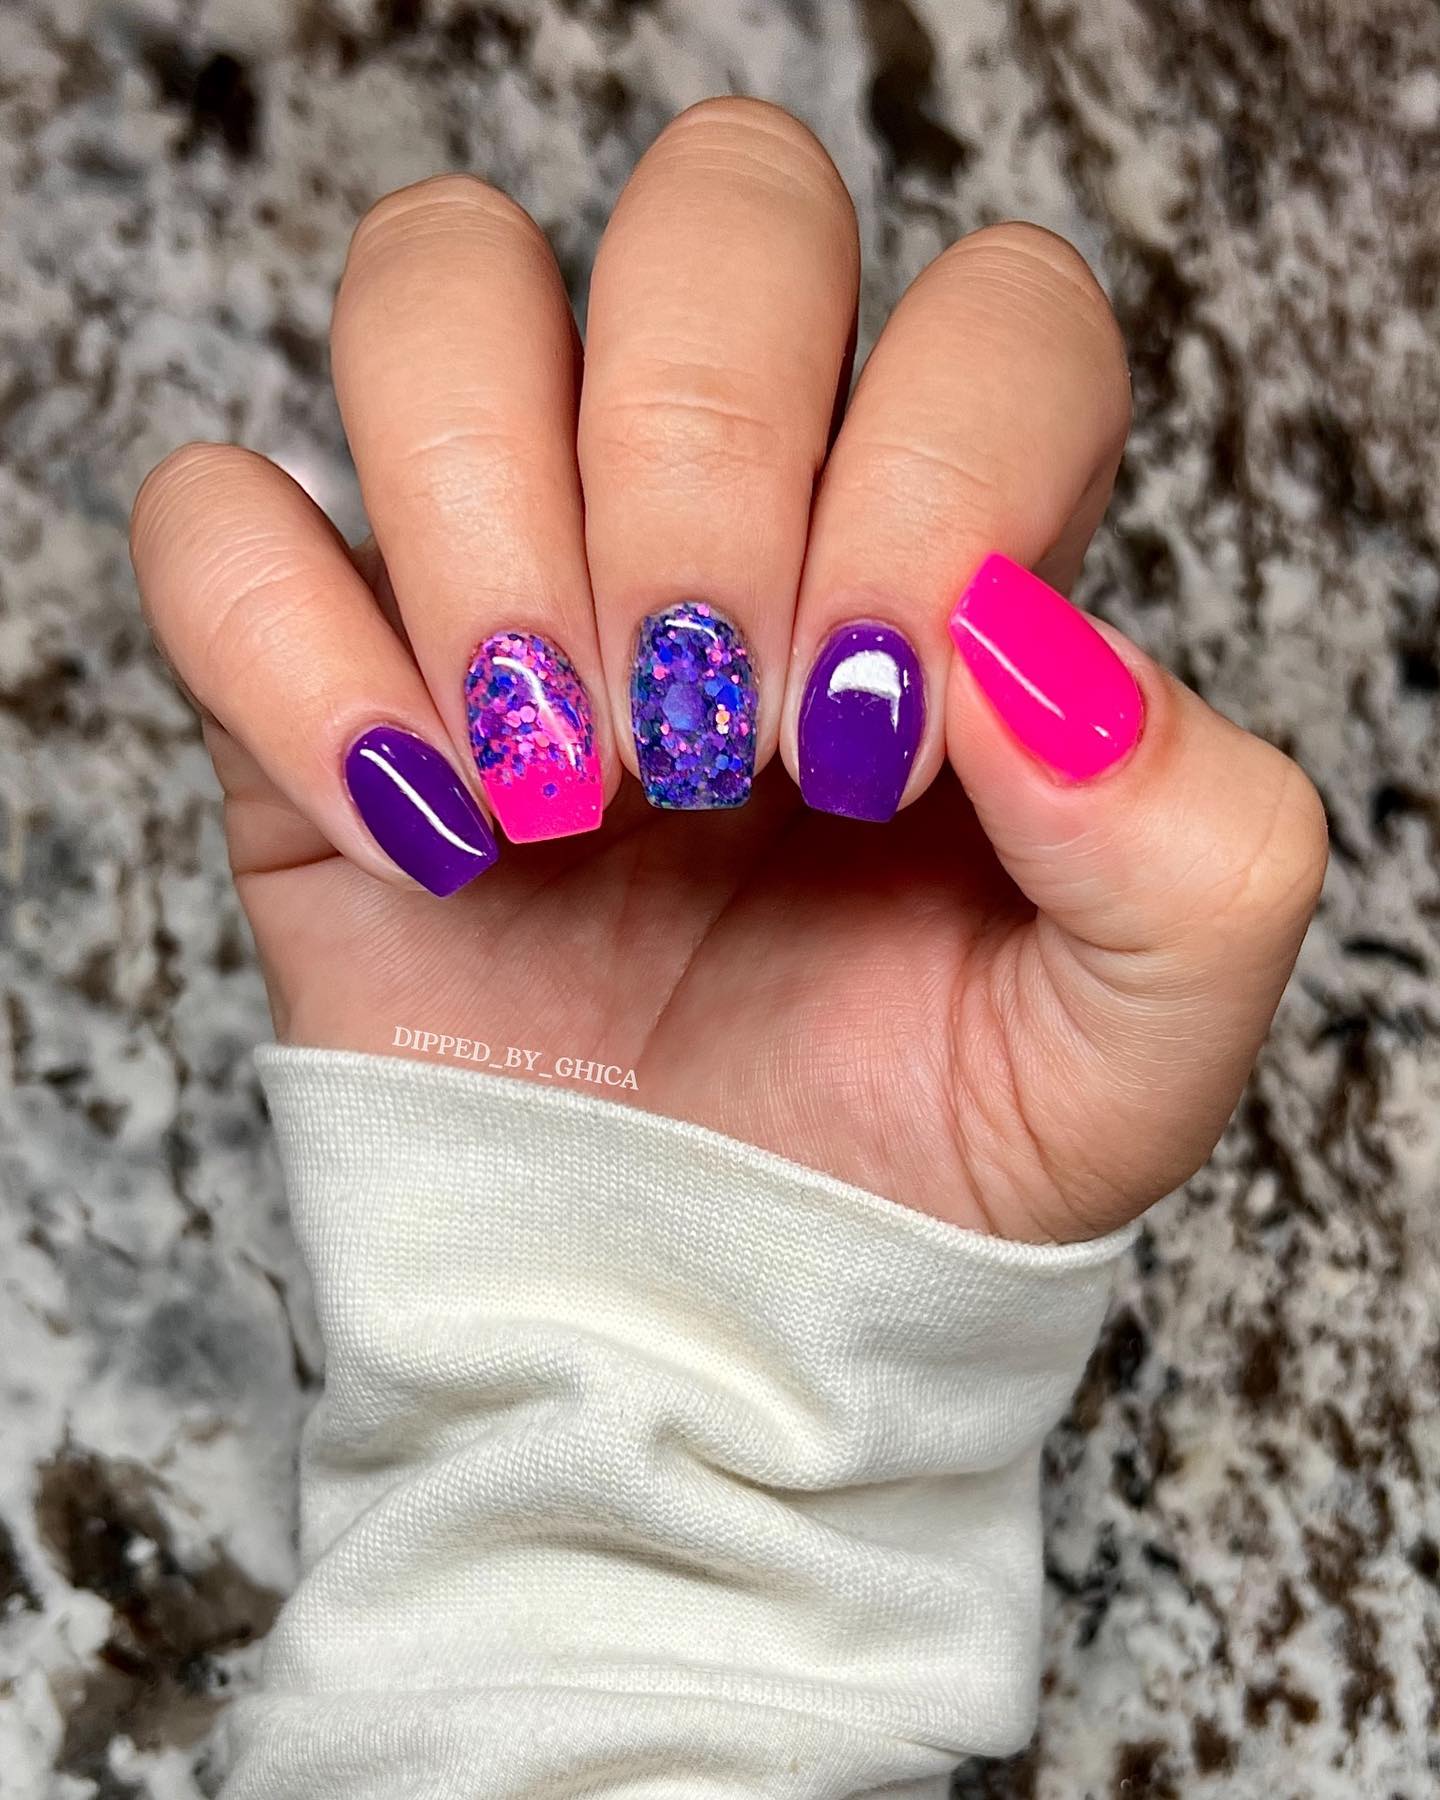 Pink and purple colors are the perfect combination of feminine and edgy. Pink is a soft, gentle color that's been popular for years. It's just as pretty on your nails as it is in the sky! Purple is a bit more daring than pink, but it can still work for anyone who wants to make a statement.